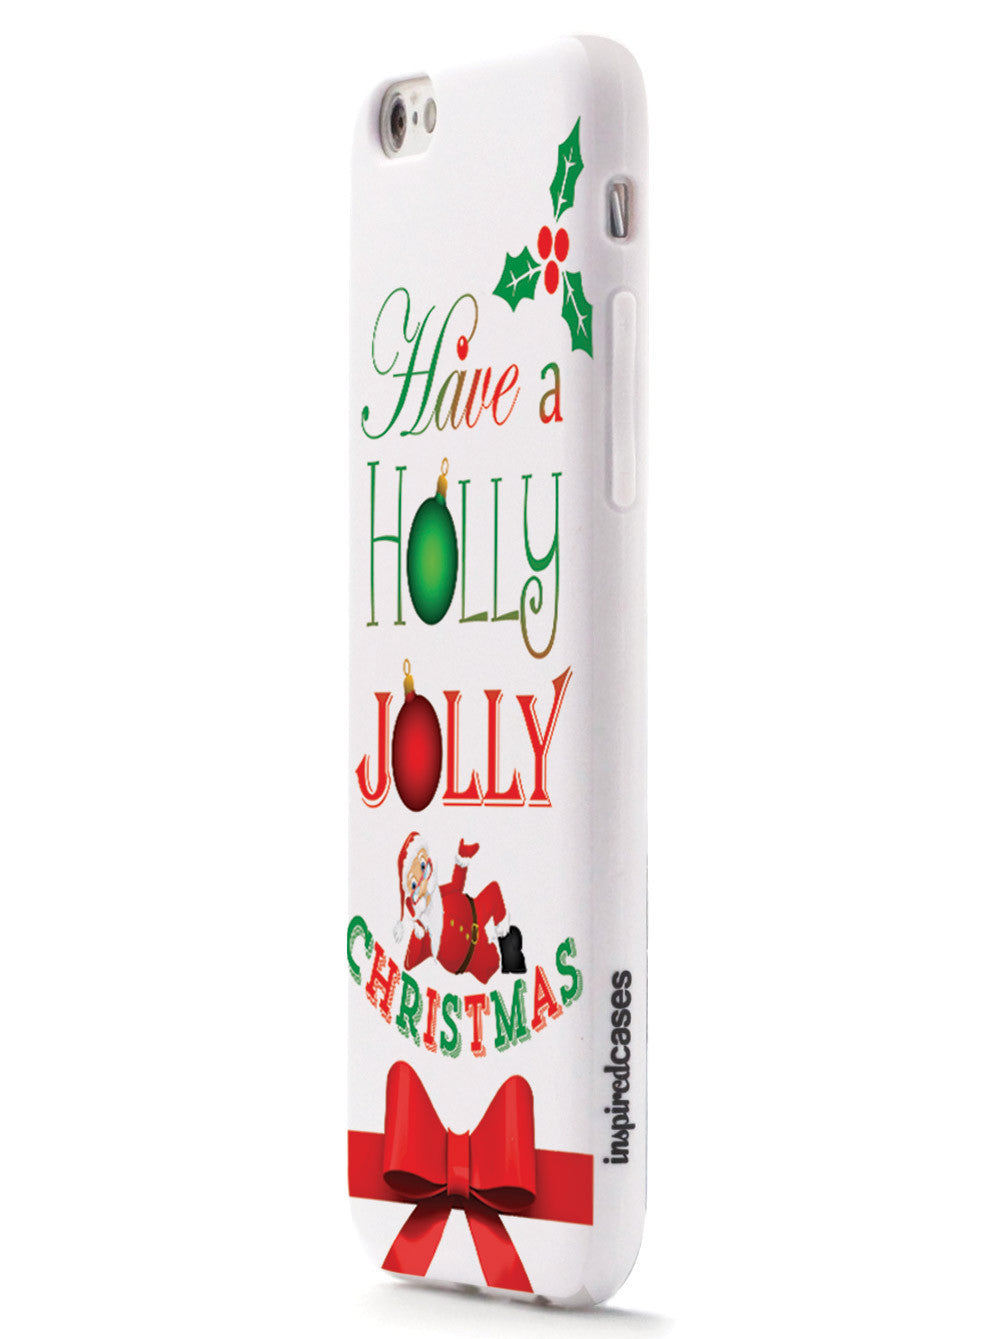 Have a Holly Jolly Christmas Case